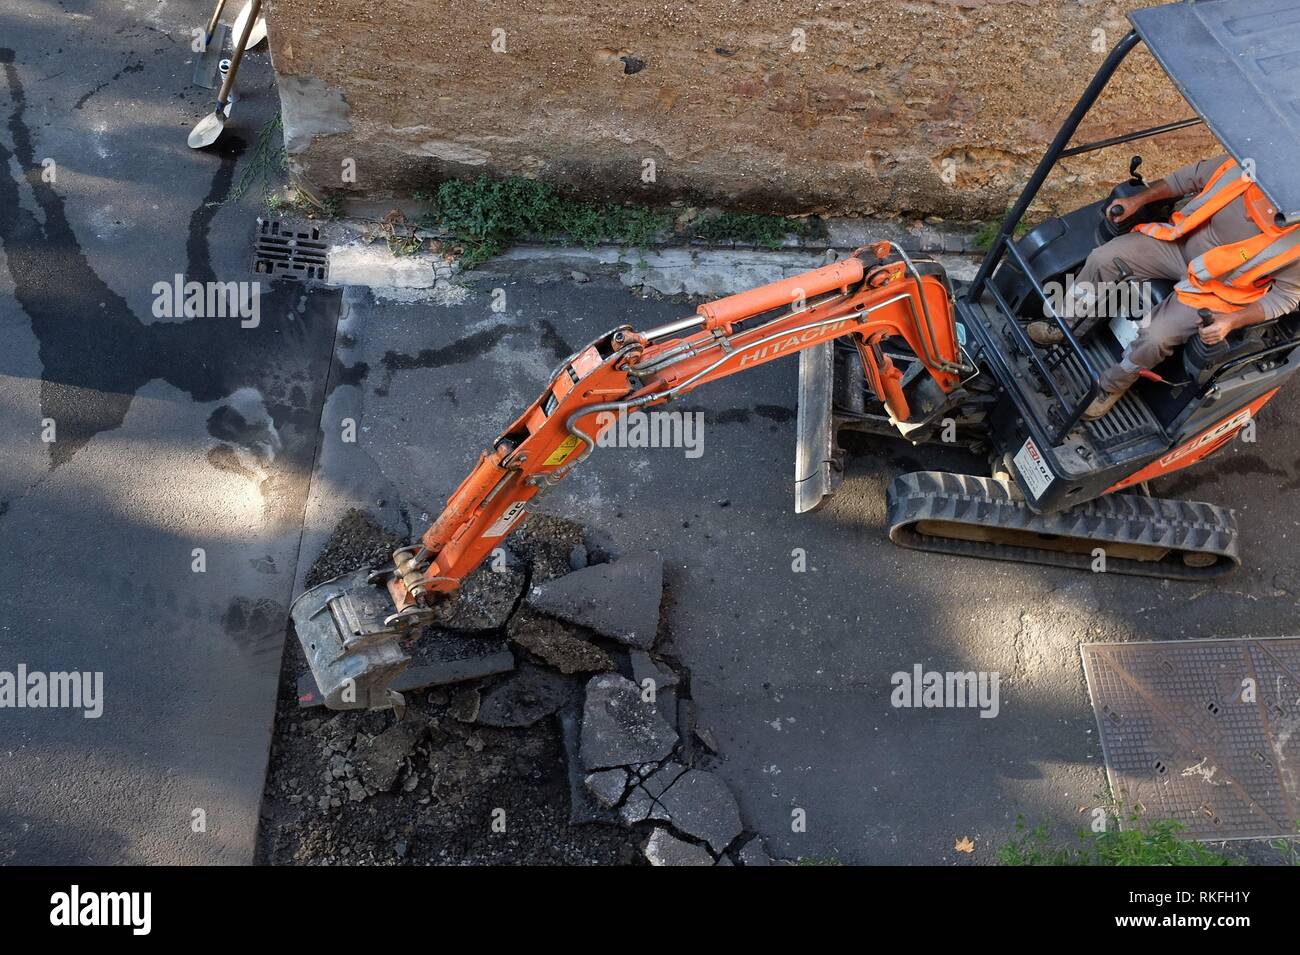 Road workers tear up old asphalt on a small street preparing to repave it. Pezenas, France Stock Photo